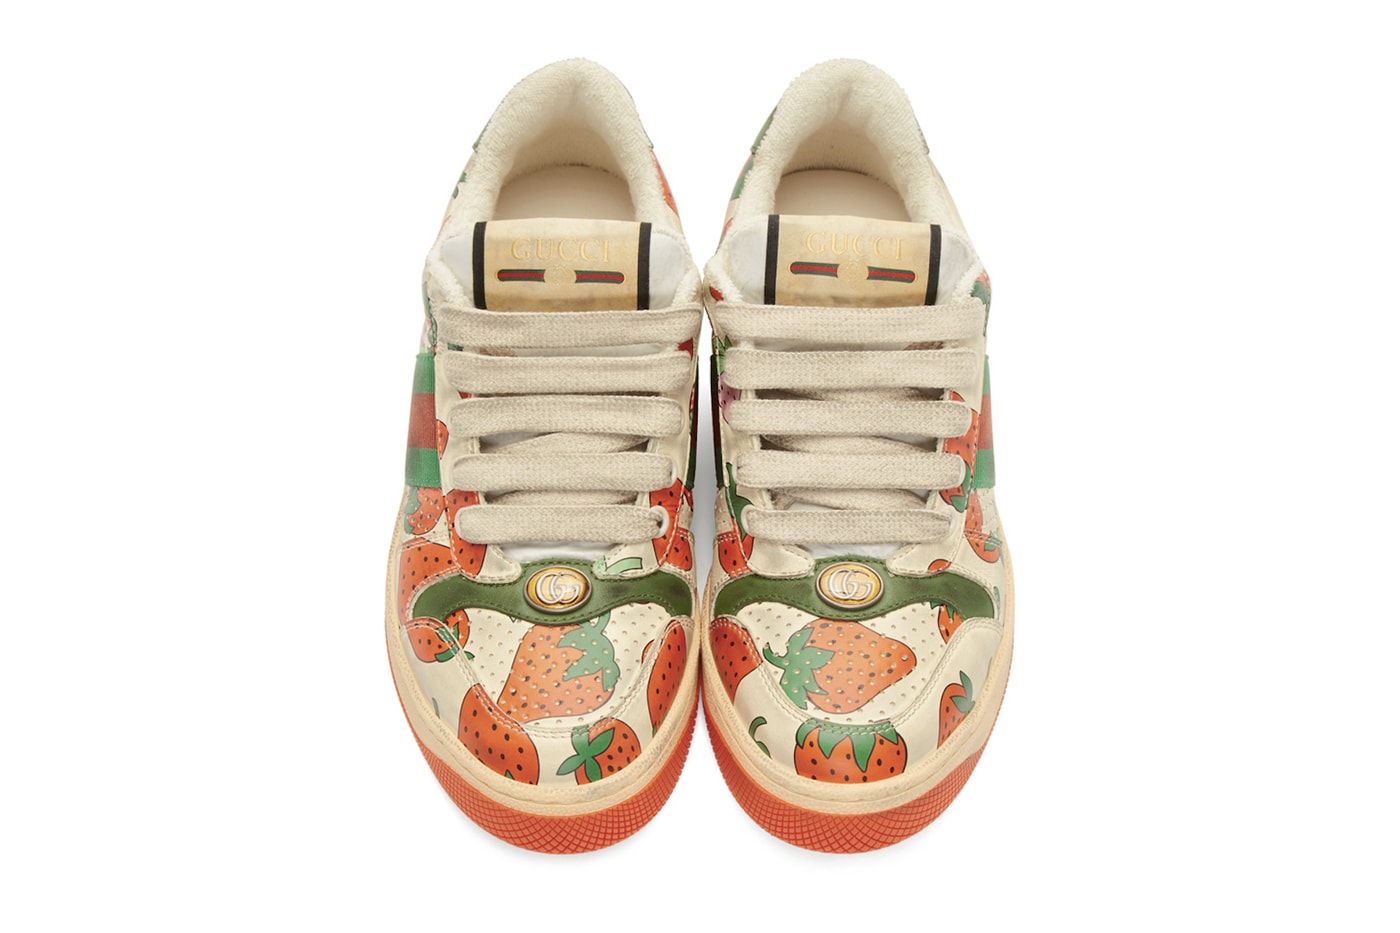 Gucci Strawberry Print Distressed Sneaker Red Green White Black Graphics 